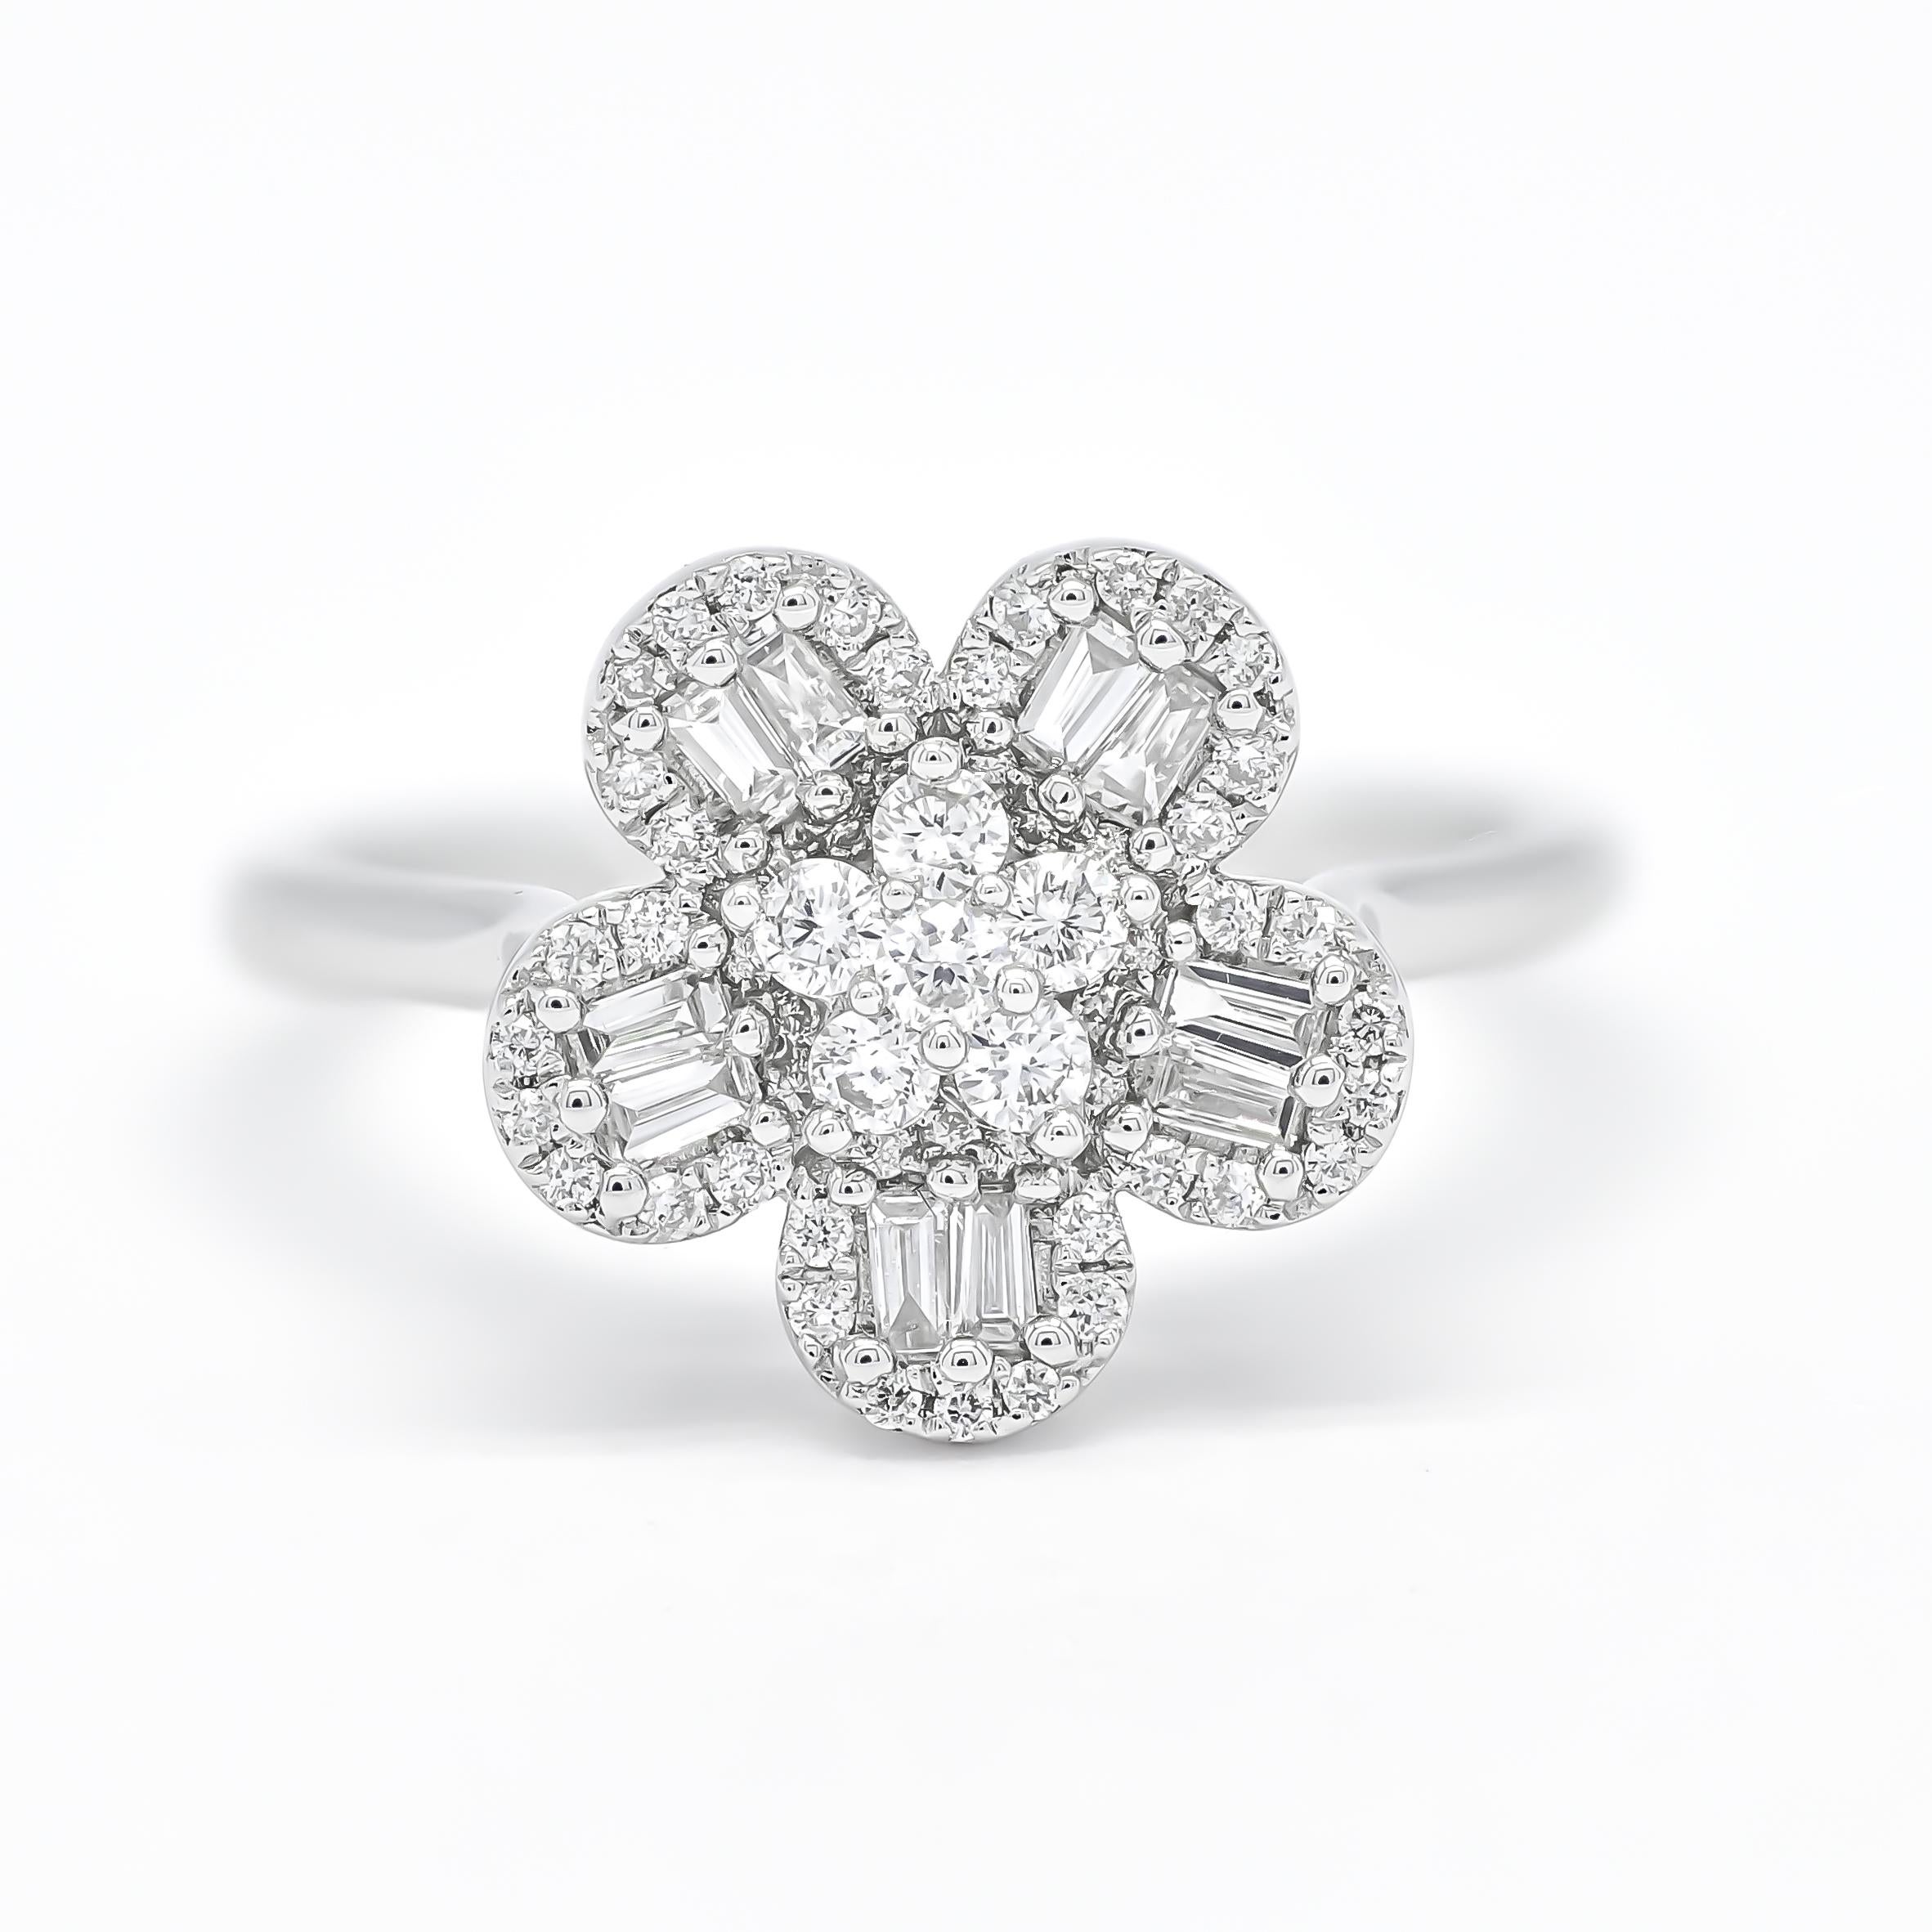 For Sale:  Natural Diamond Ring, 18KT White Gold Statement Ring R072471, Flower Cluster Rin 7